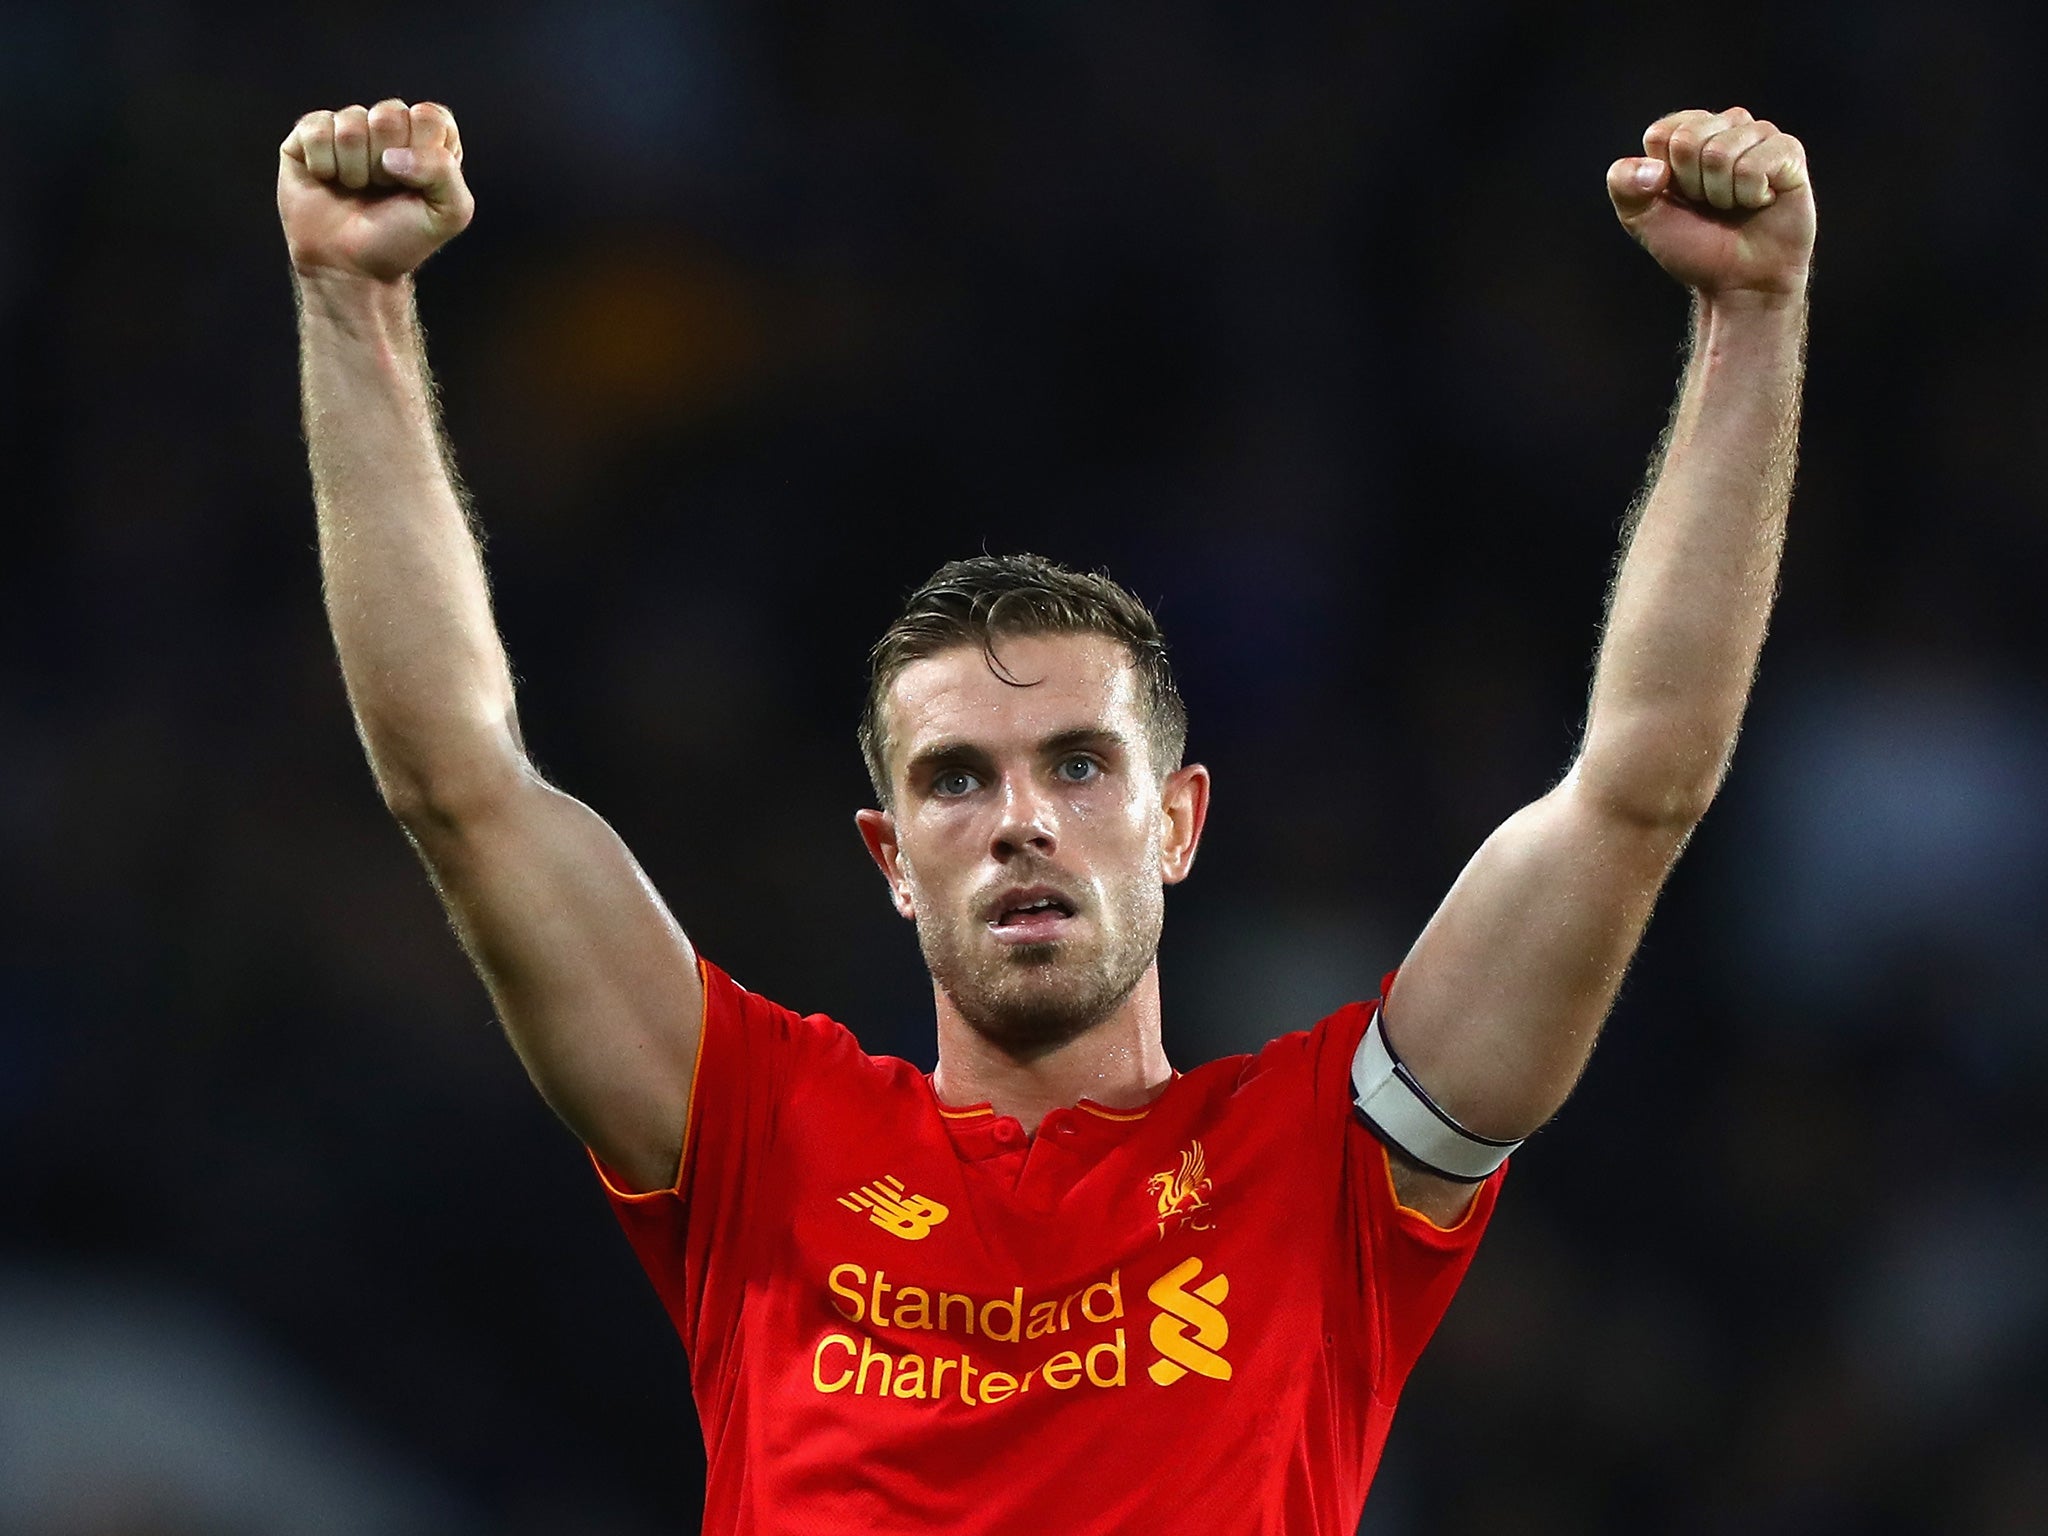 Henderson has captained Liverpool during their impressive start to the season